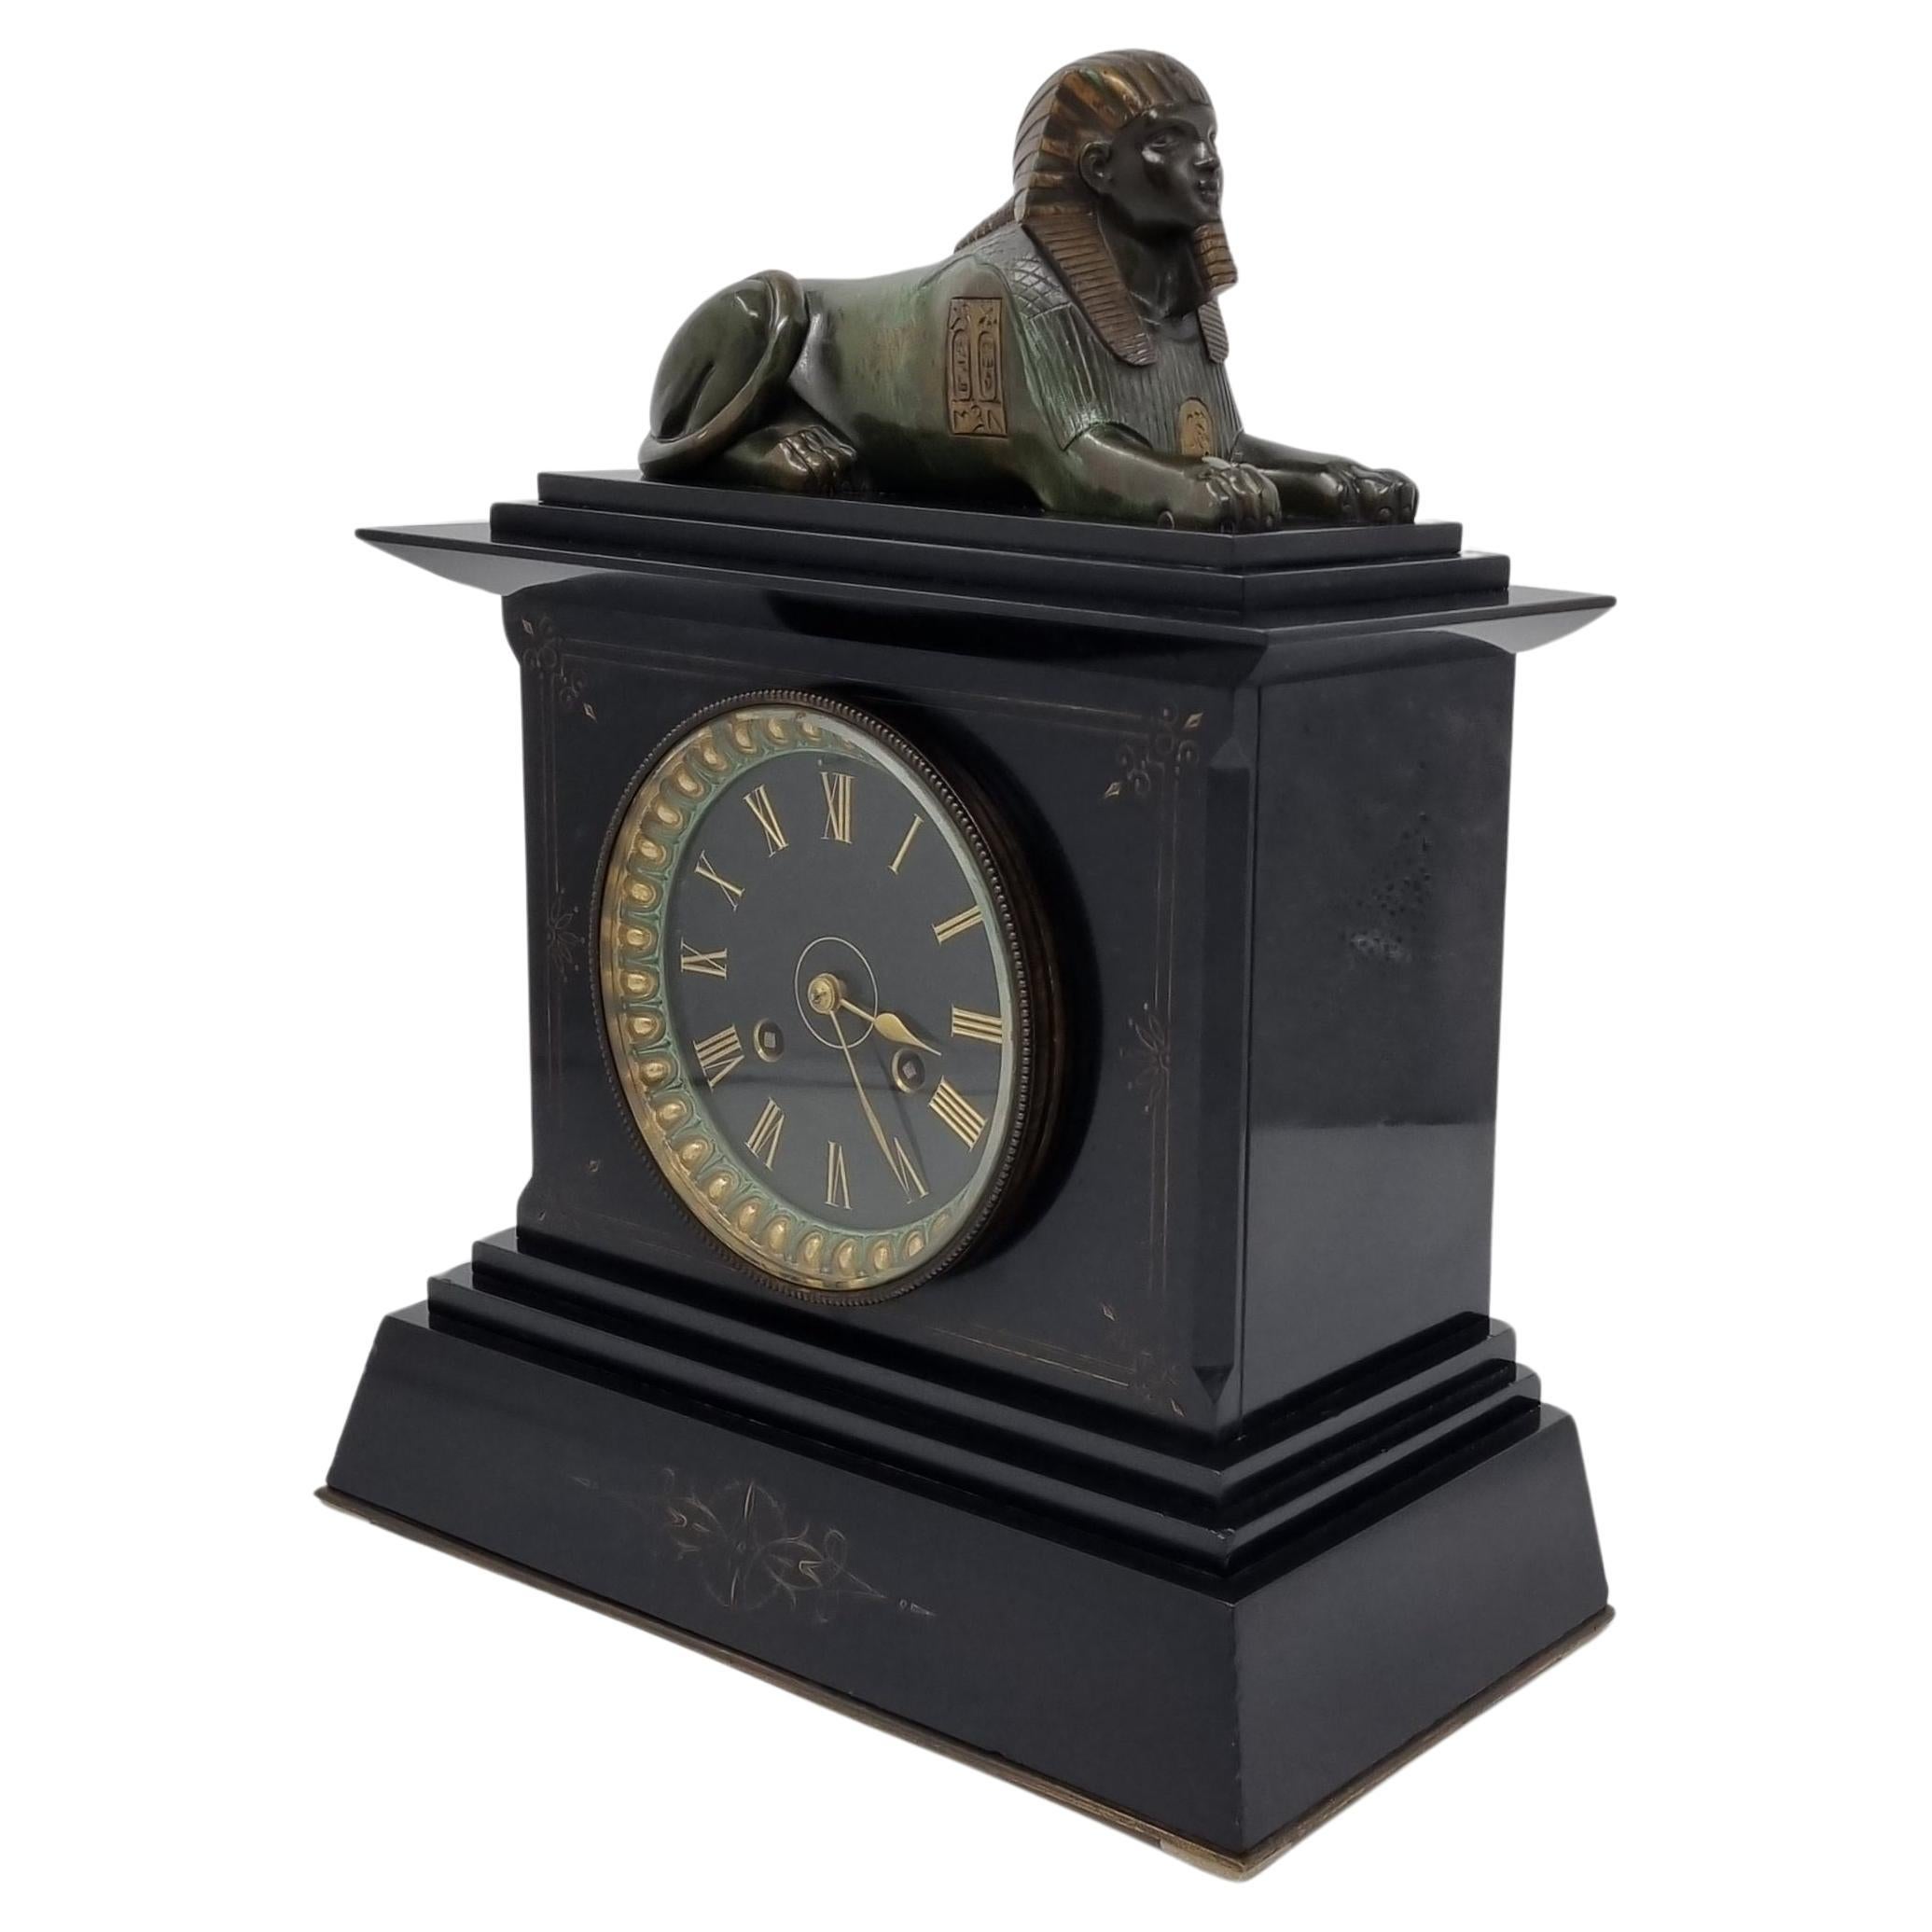 19th Century Egyptian Revival Mantel Clock With Bronze Sphinx